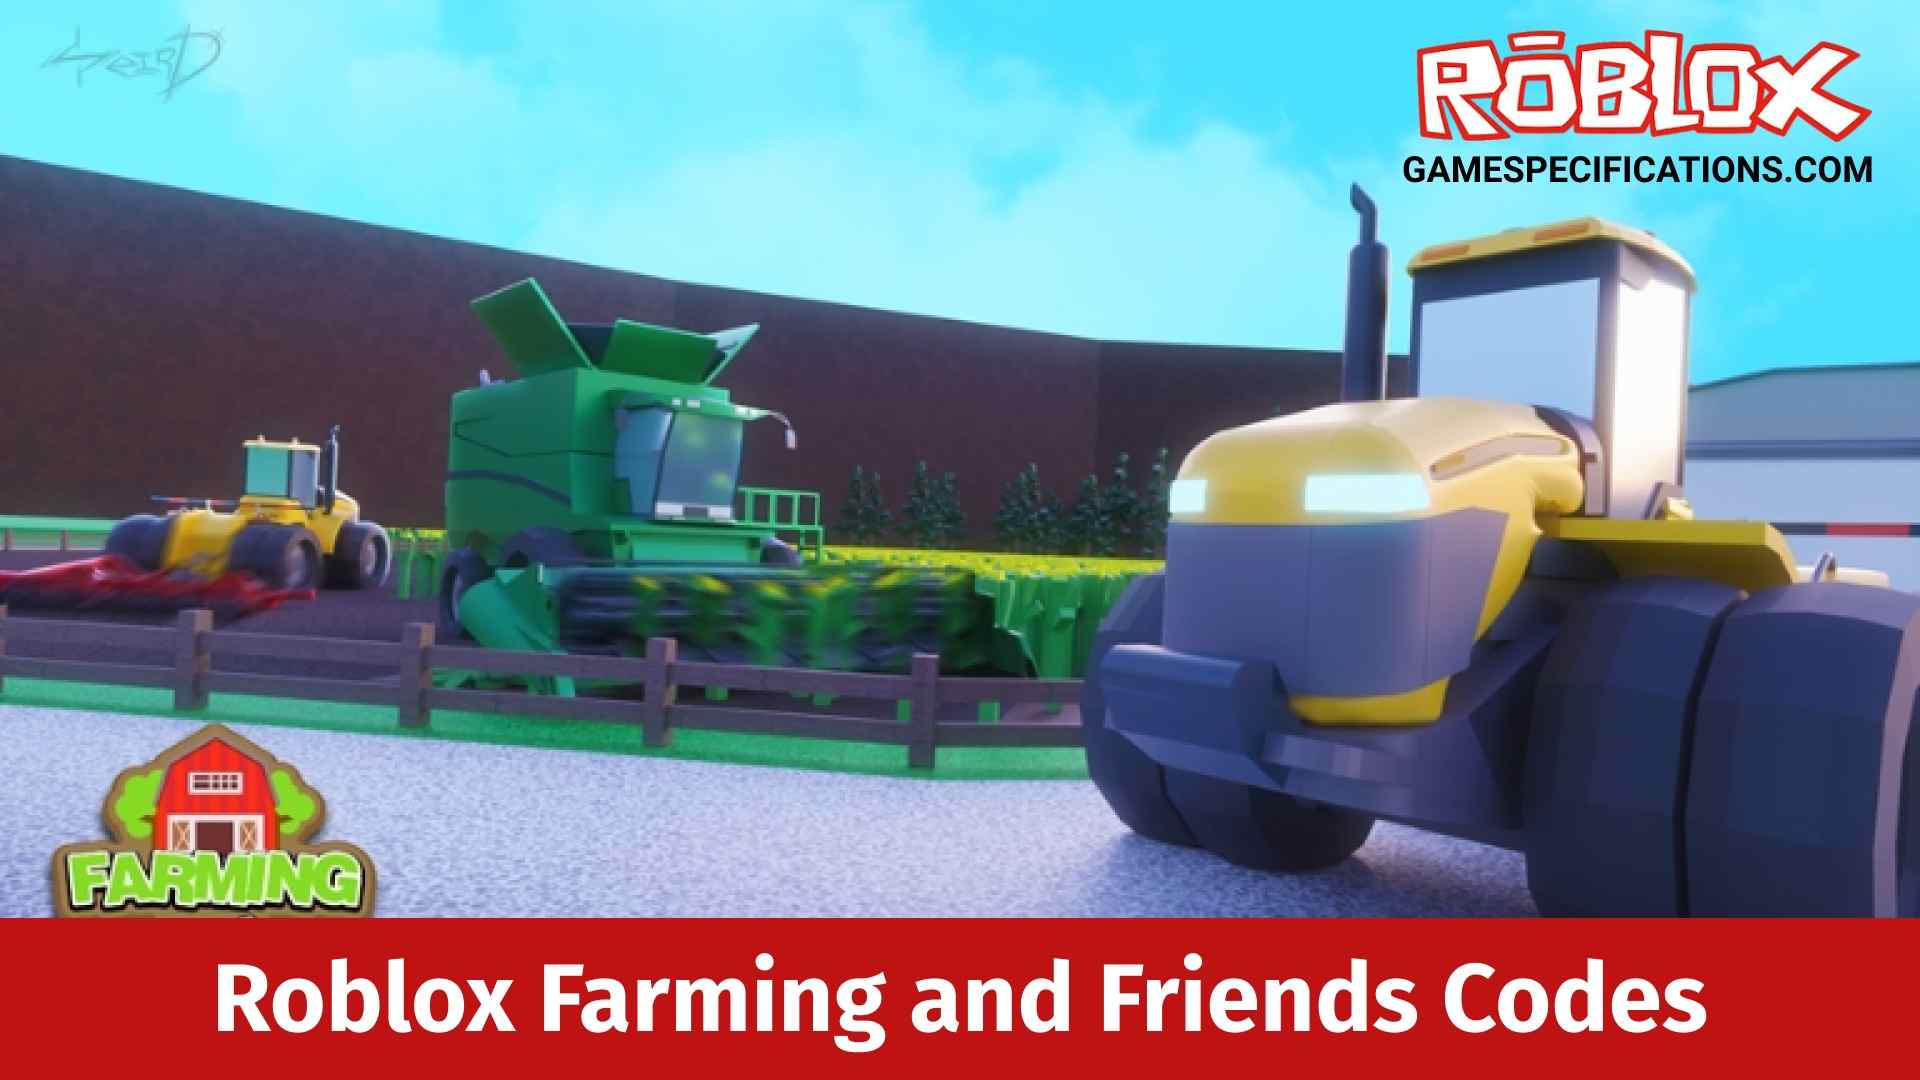 Roblox Farming And Friends Codes July 2021 Game Specifications - roblox farming and friends codes